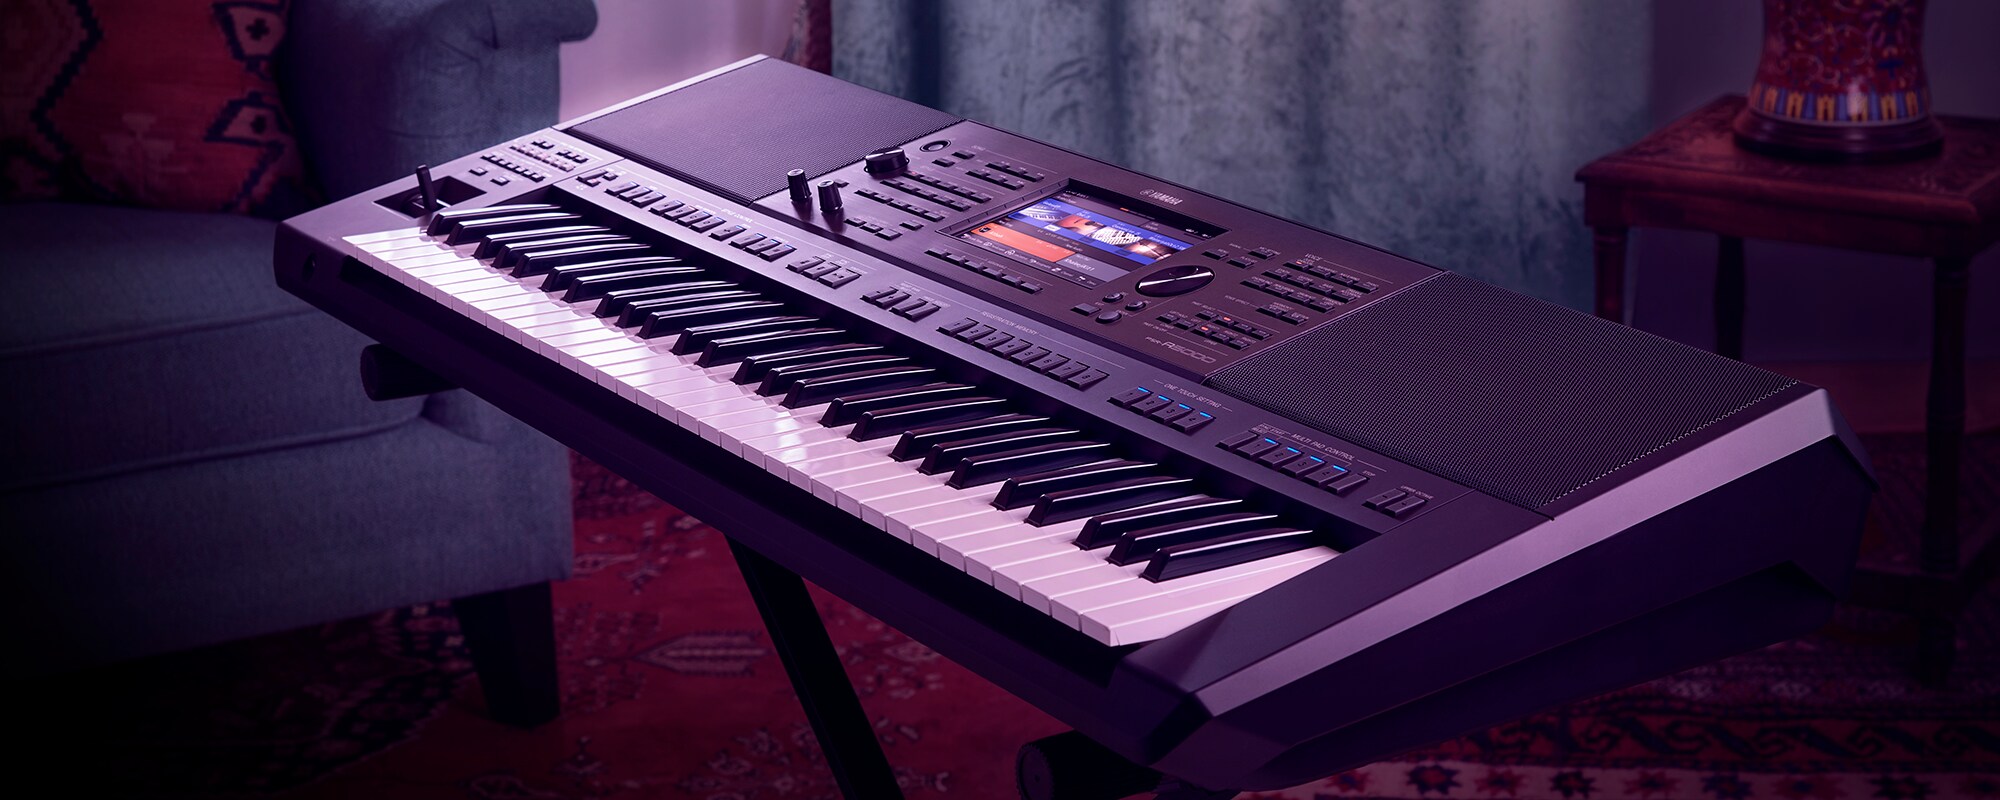 PSR-A5000 - Overview - Digital Workstations - Keyboard Instruments - Musical Instruments - Products - Yamaha - Other European Countries